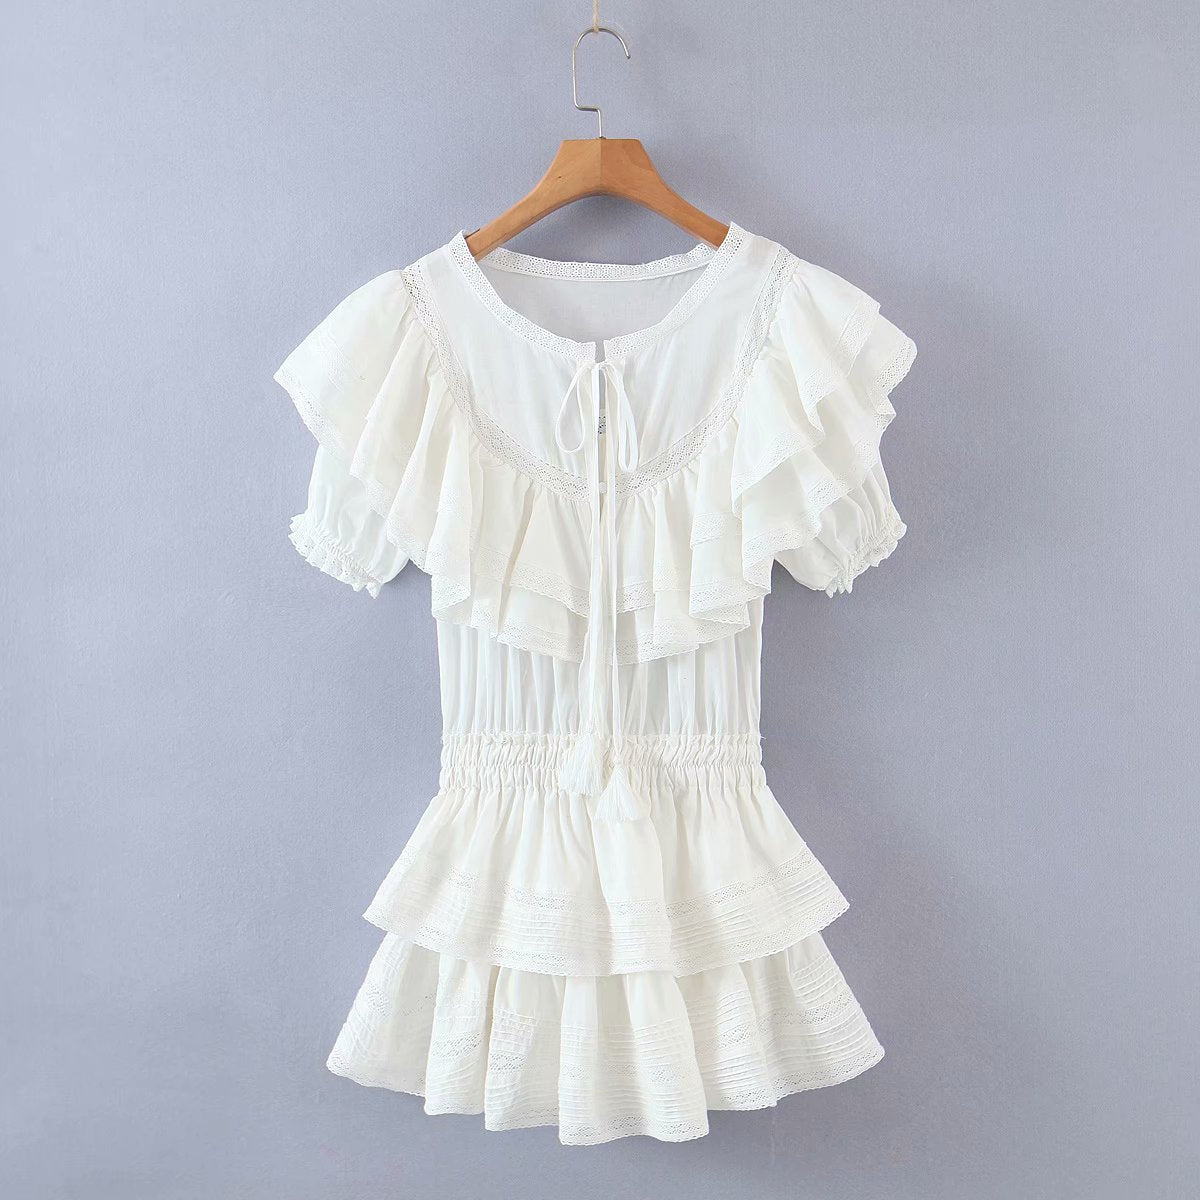 Chicdear Summer Women Mini Dress White Cotton Embroidery O Neck Hollow Out Party Dress Lace Short Sleeve Elegant Solid Vestidos